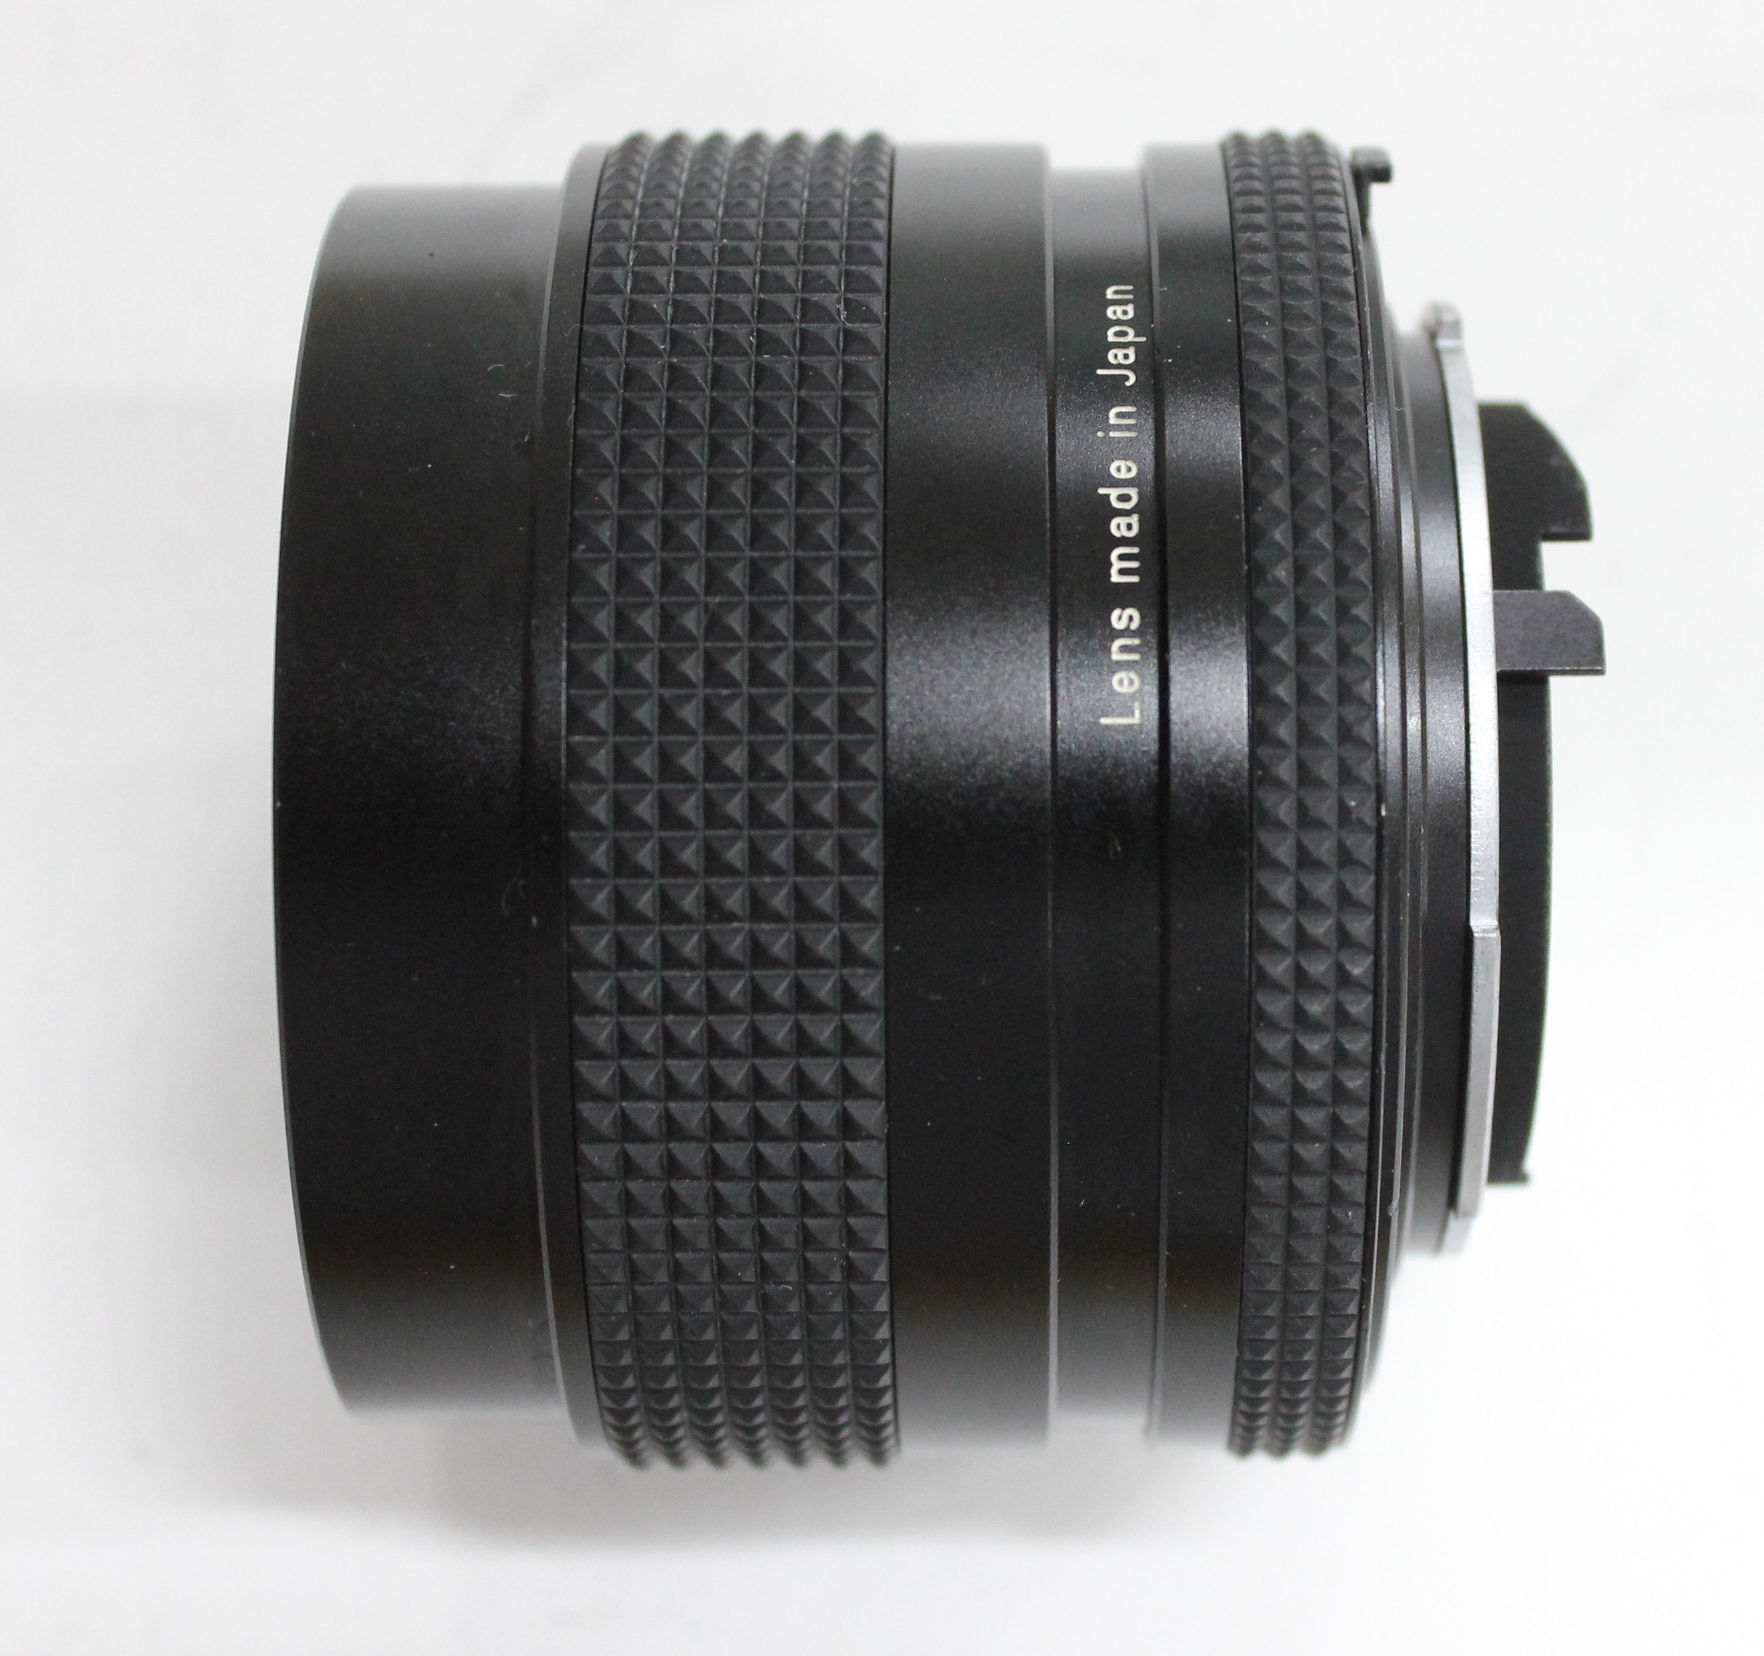  Contax Carl Zeiss Distagon T* 35mm F2.8 MMJ MF Lens from JAPAN Photo 4